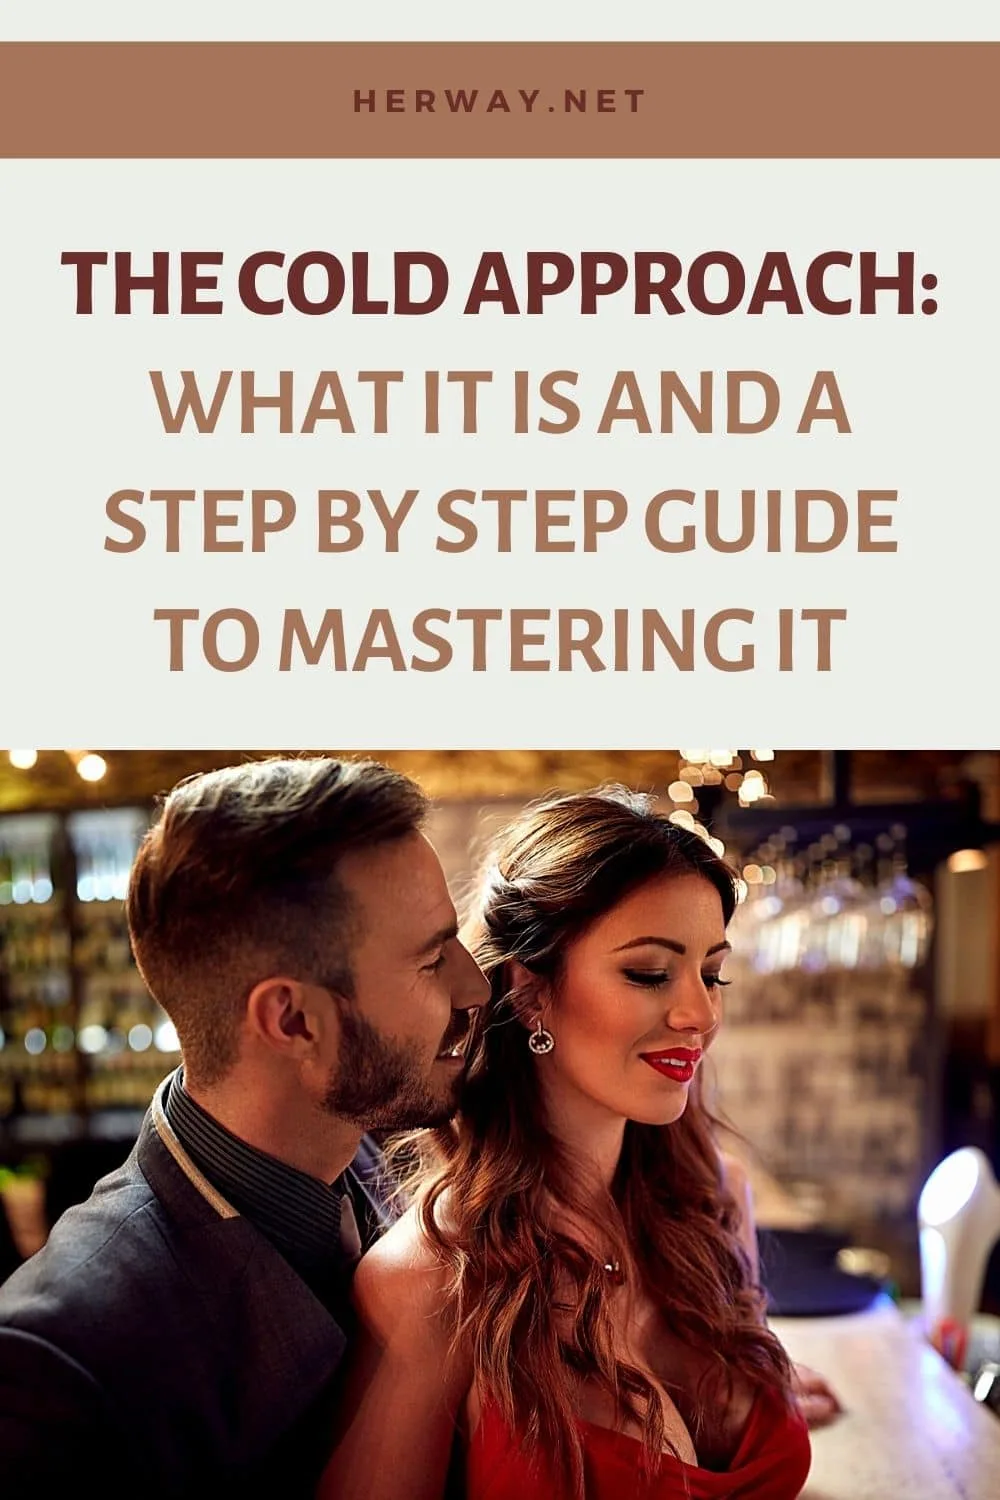 The Cold Approach: What It Is And A Step By Step Guide To Mastering It